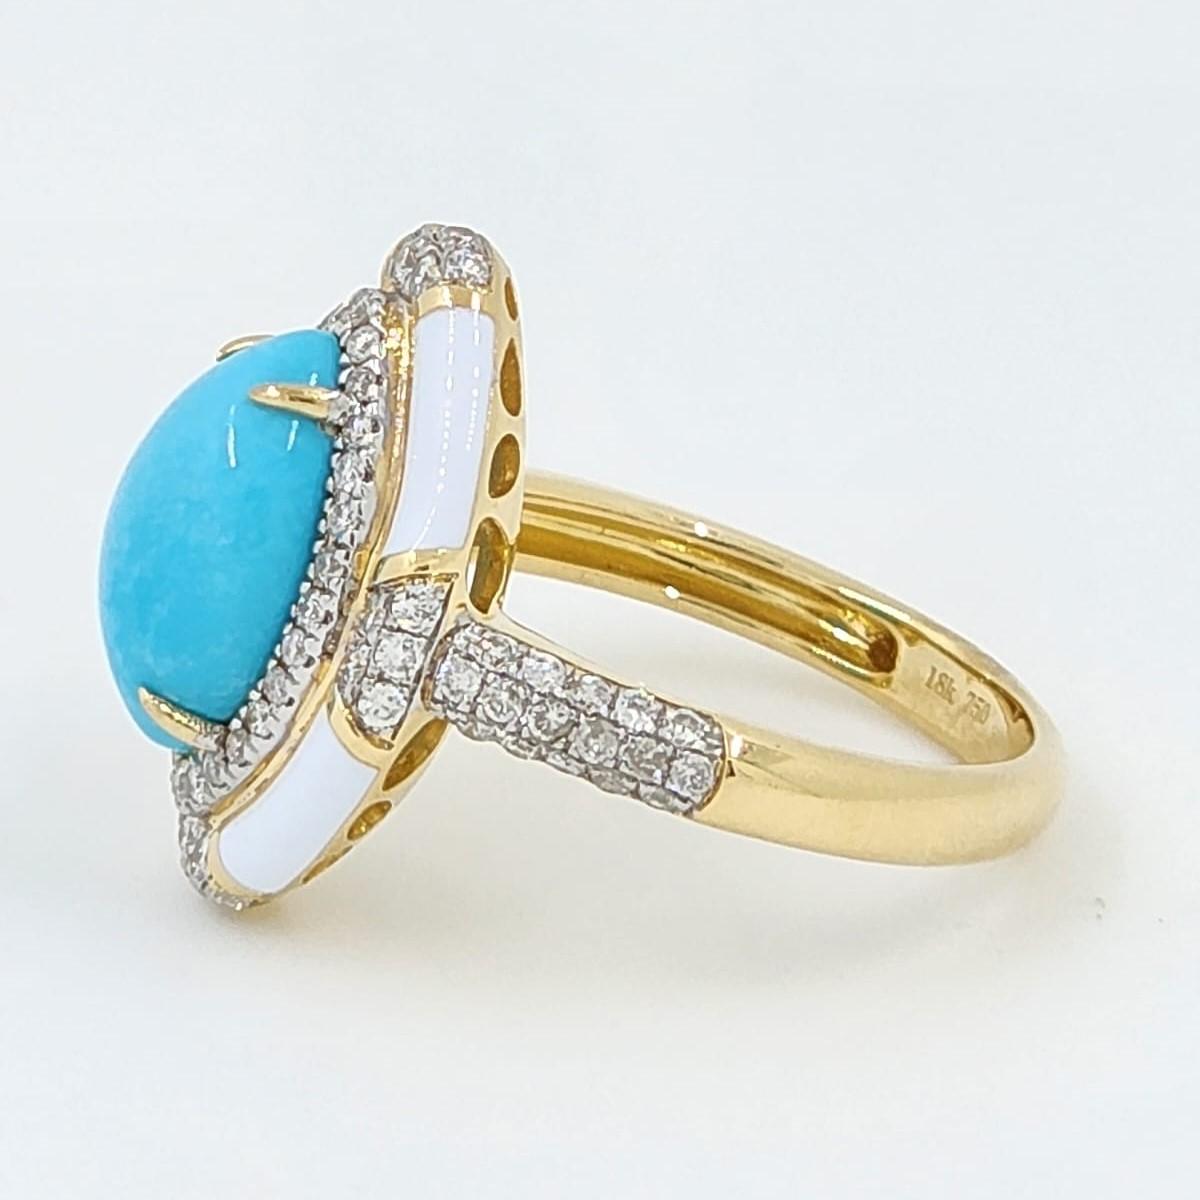 2.08 Carat Sleeping Beauty Turquoise Diamond Ring in 18 Karat Yellow Gold In New Condition For Sale In Hong Kong, HK